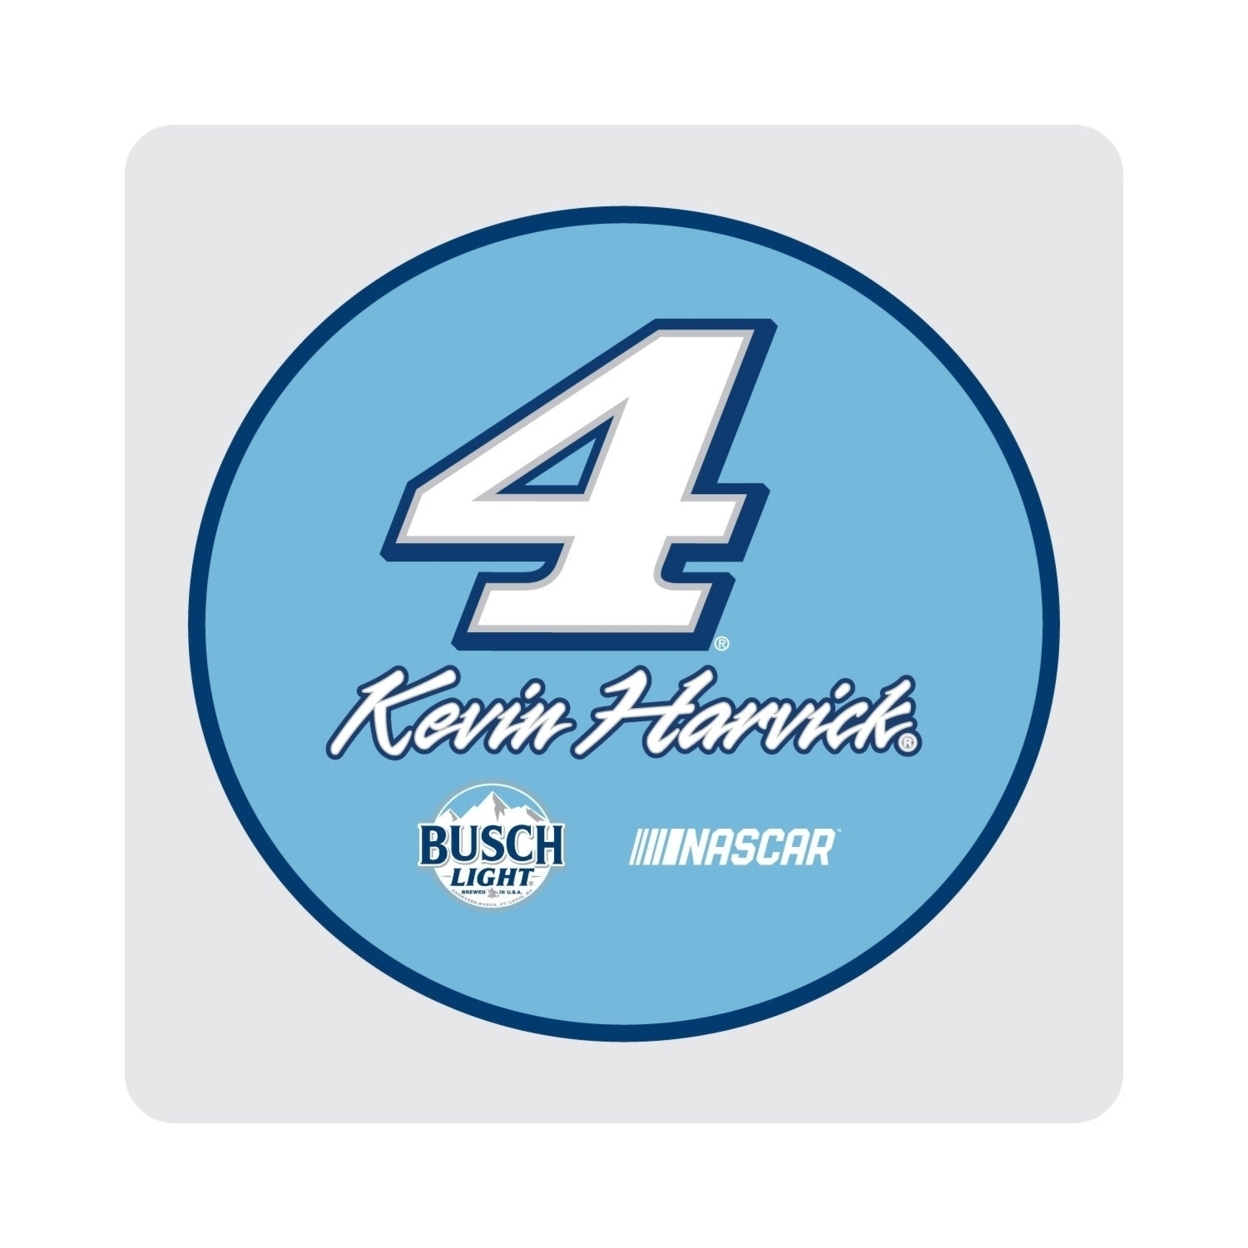 Kevin Harvick #4 Acrylic Coaster 2-Pack New For 2020